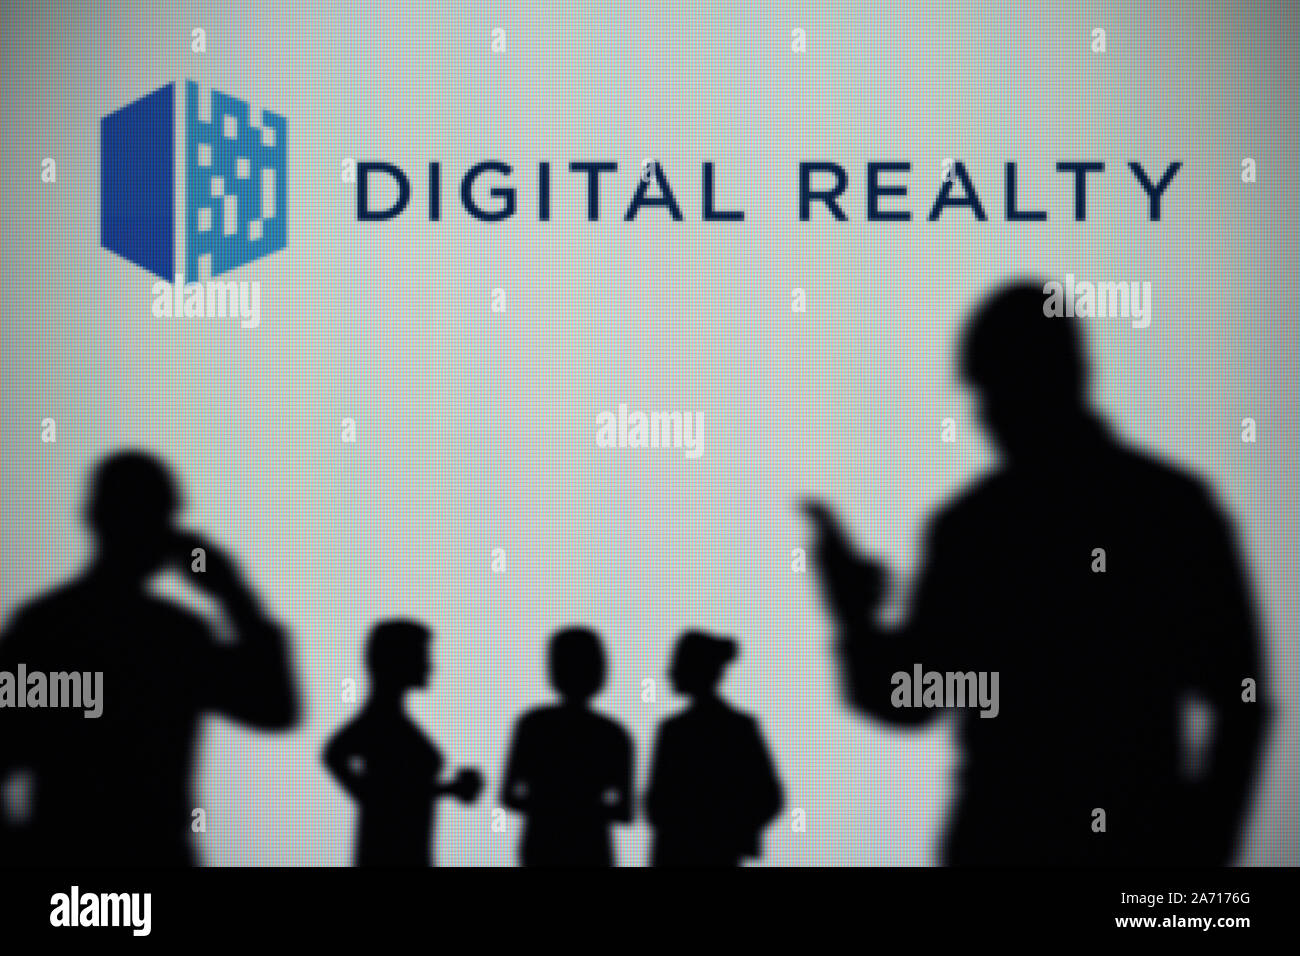 The Digital Realty logo is seen on an LED screen in the background while a silhouetted person uses a smartphone (Editorial use only) Stock Photo